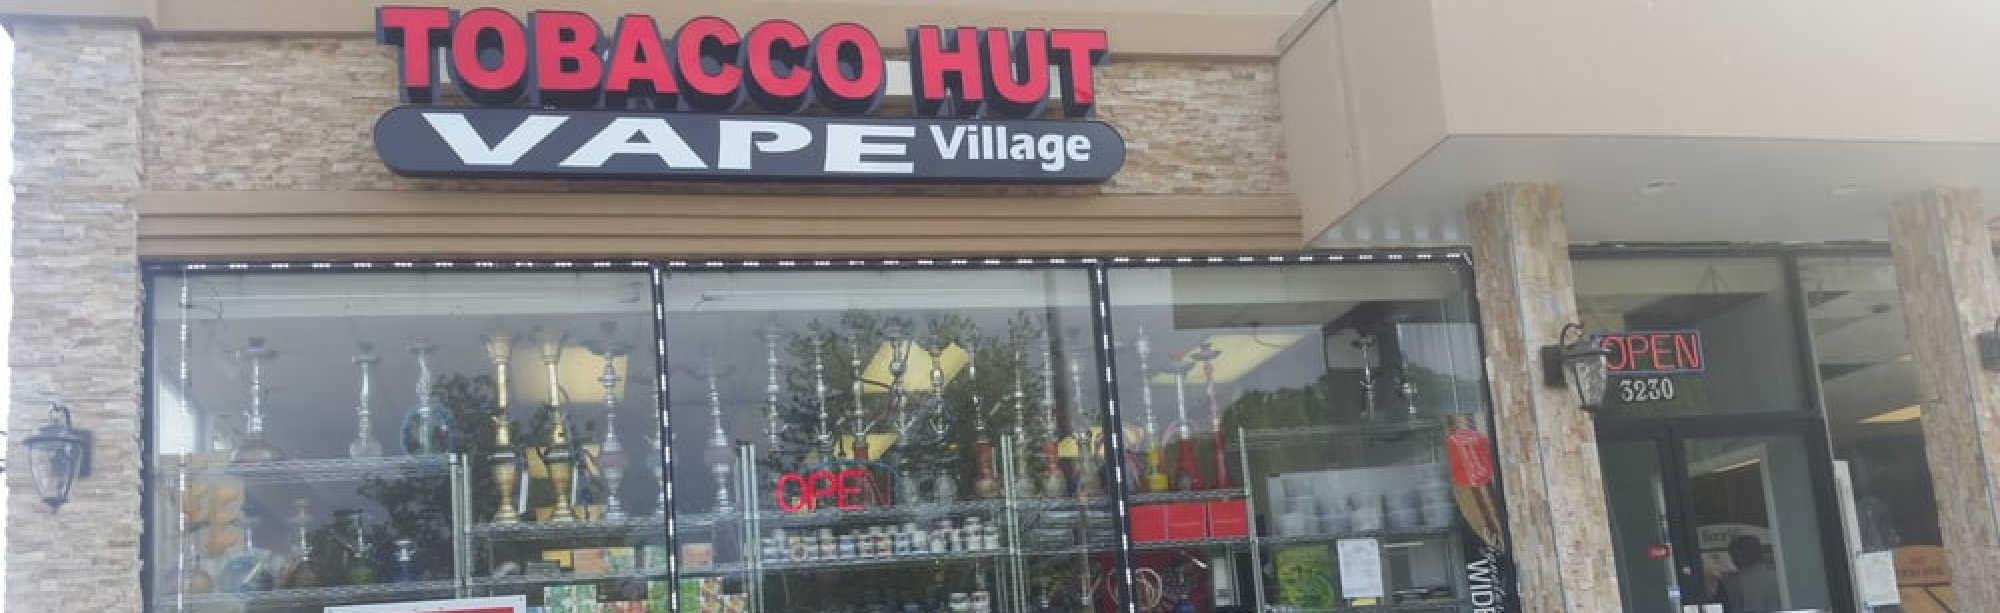 image of tobacco hut & vape in frederic md